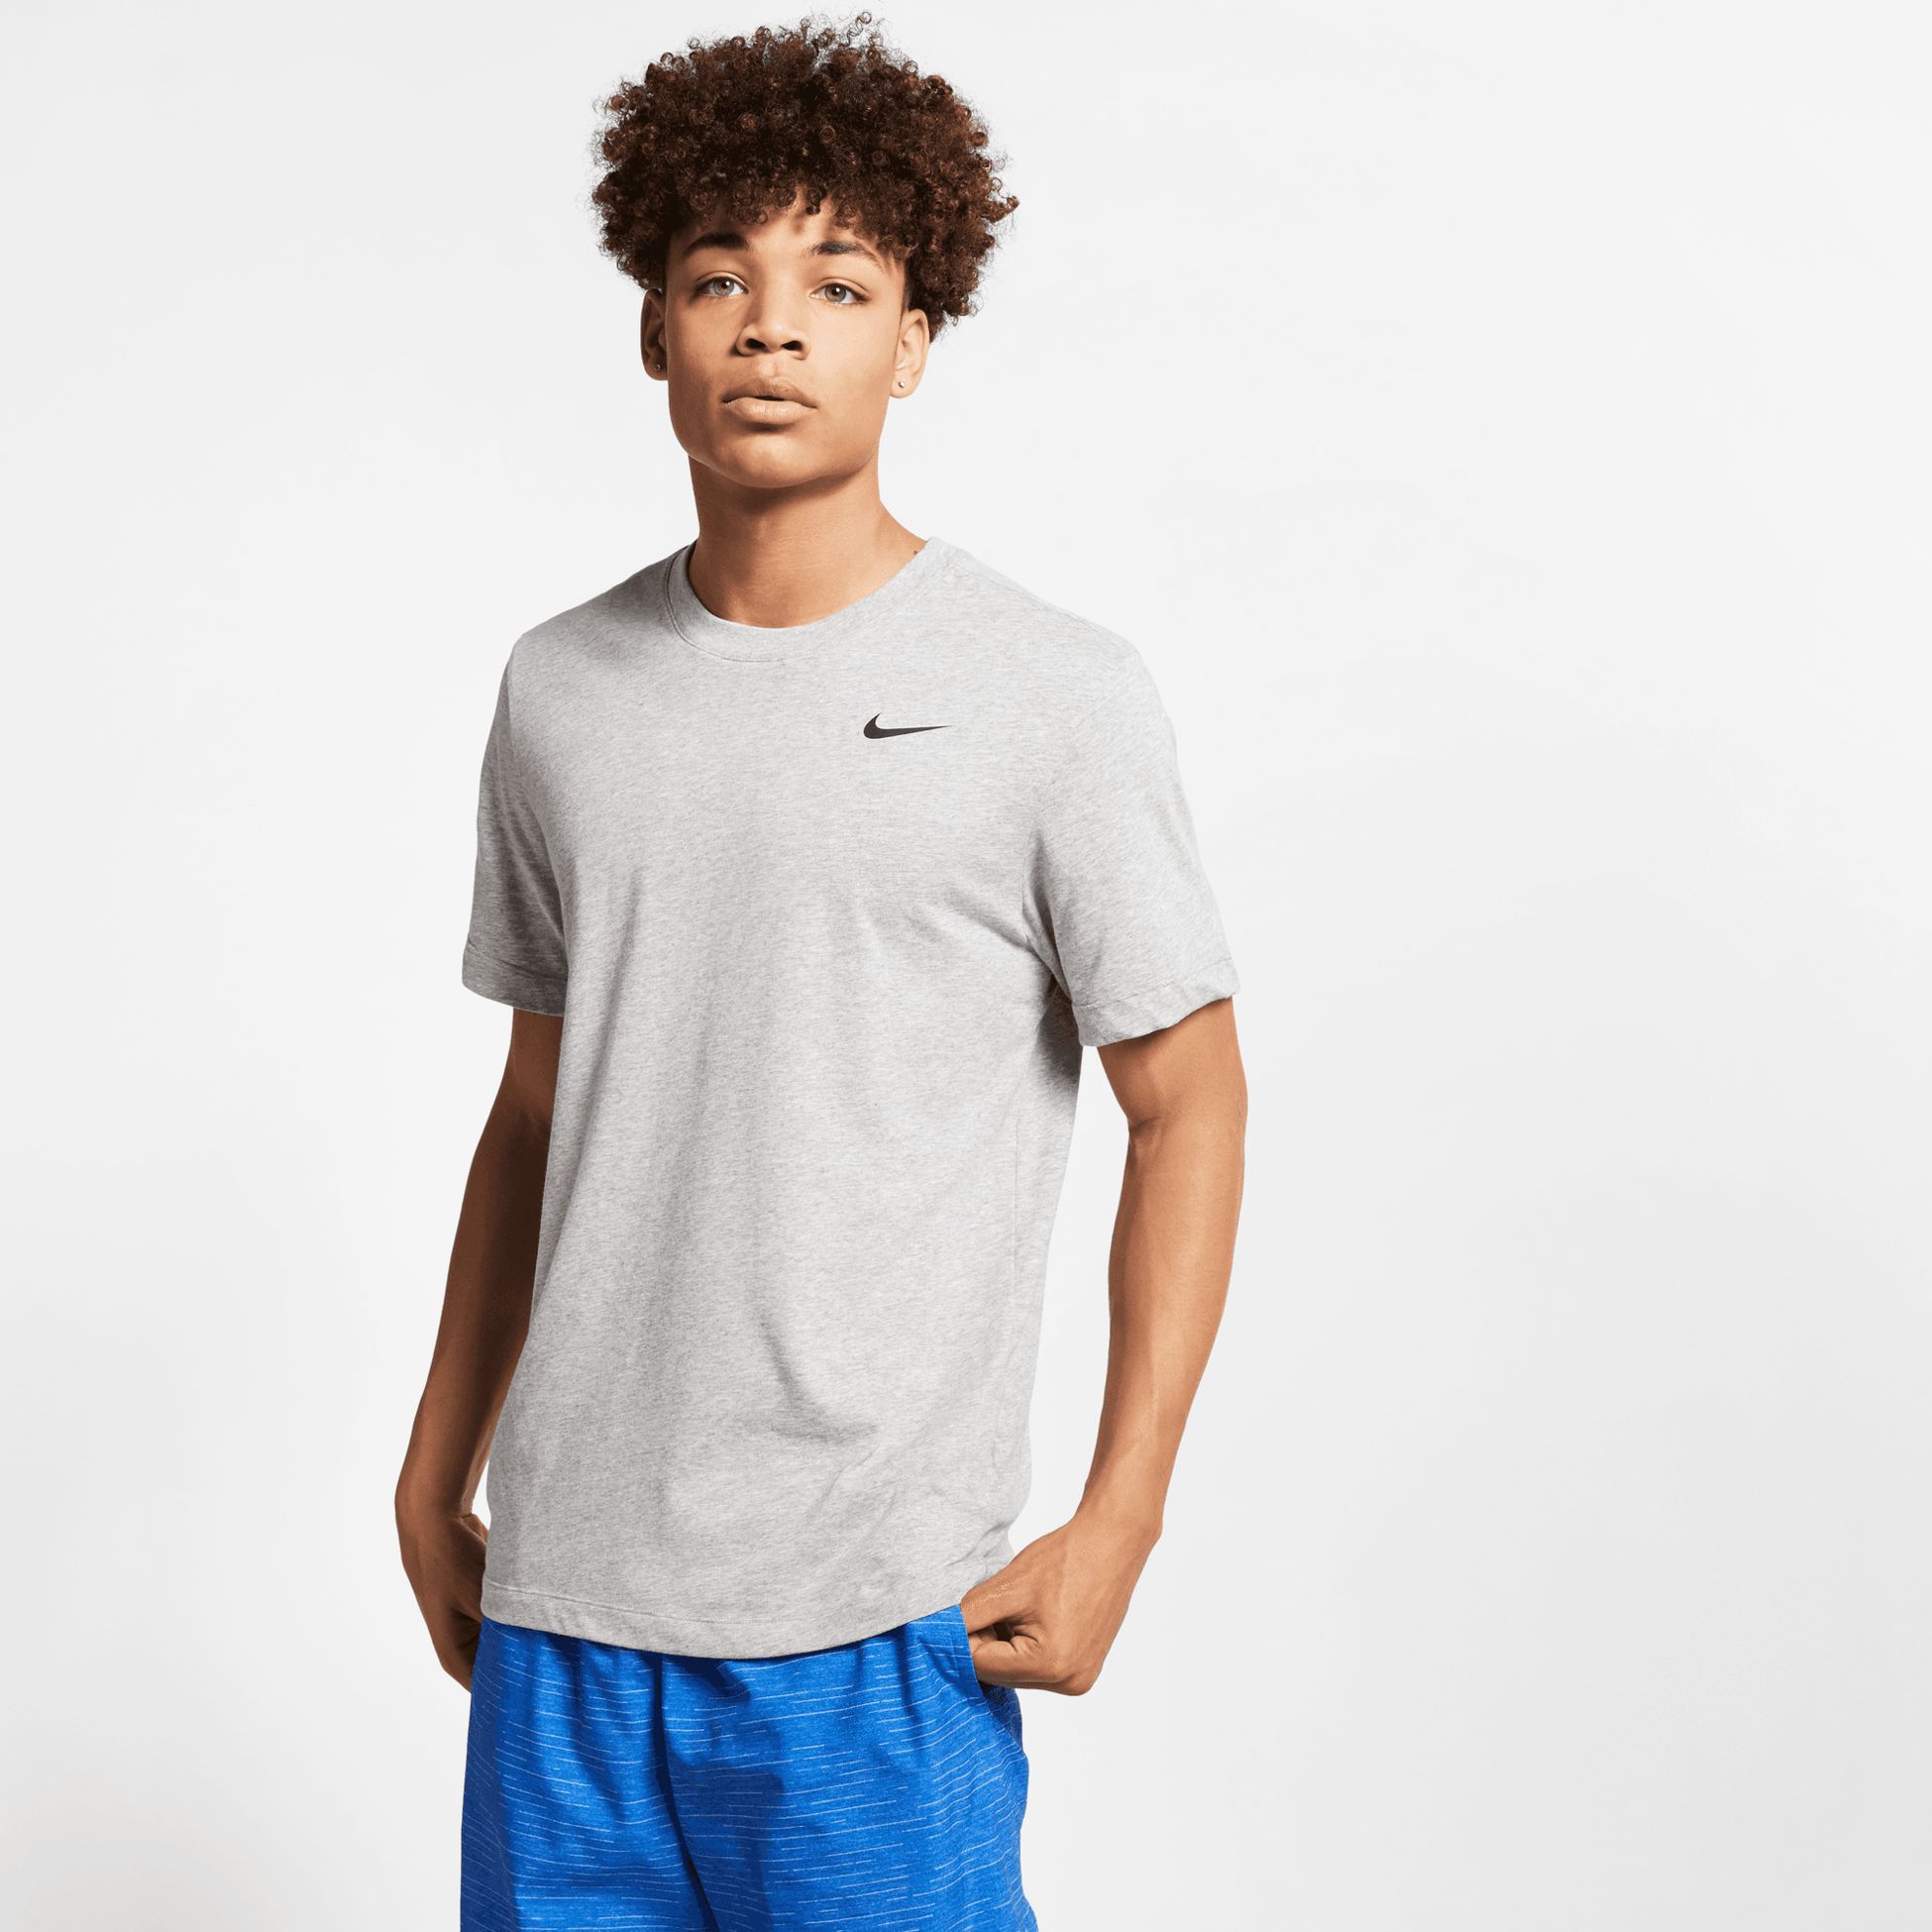 NIKE, M NK DRY TEE DFC CREW SOLID